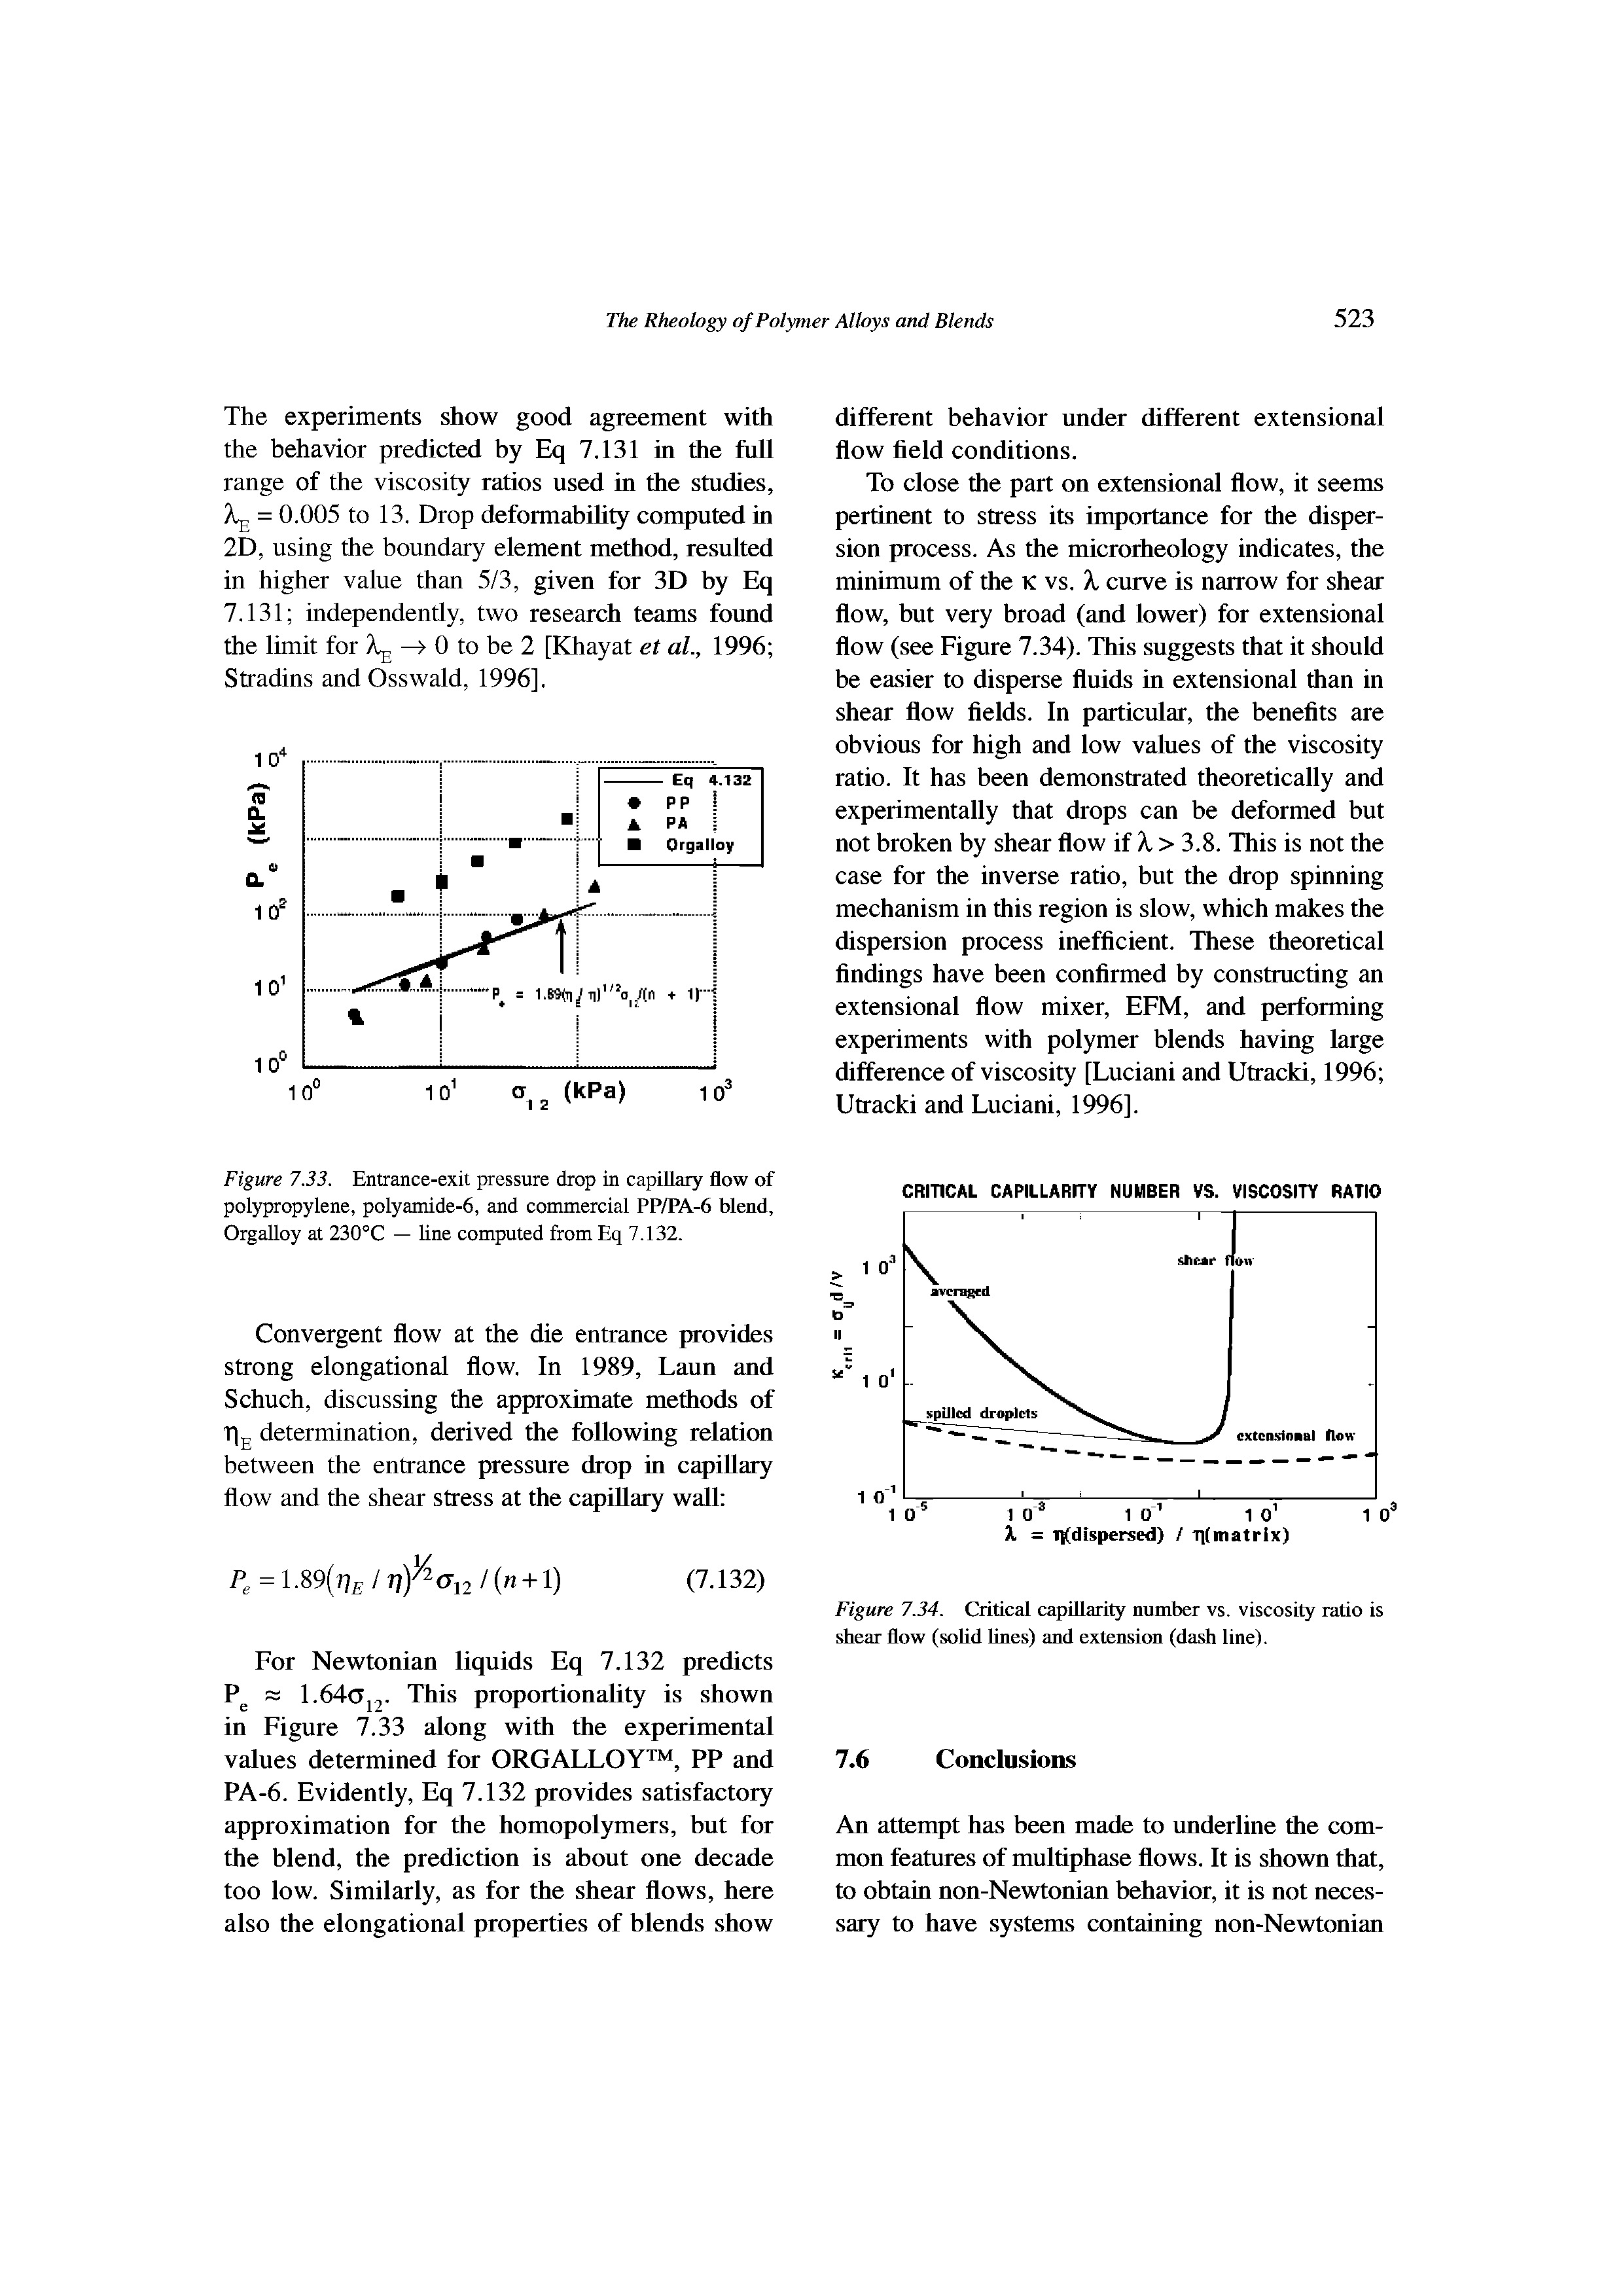 Figure 7.33. Entrance-exit pressure drop in capiUaiy flow of polypropylene, polyamide-6, and commercial PP/PA-6 blend, Orgalloy at 230°C — line computed from Eq 7.132.